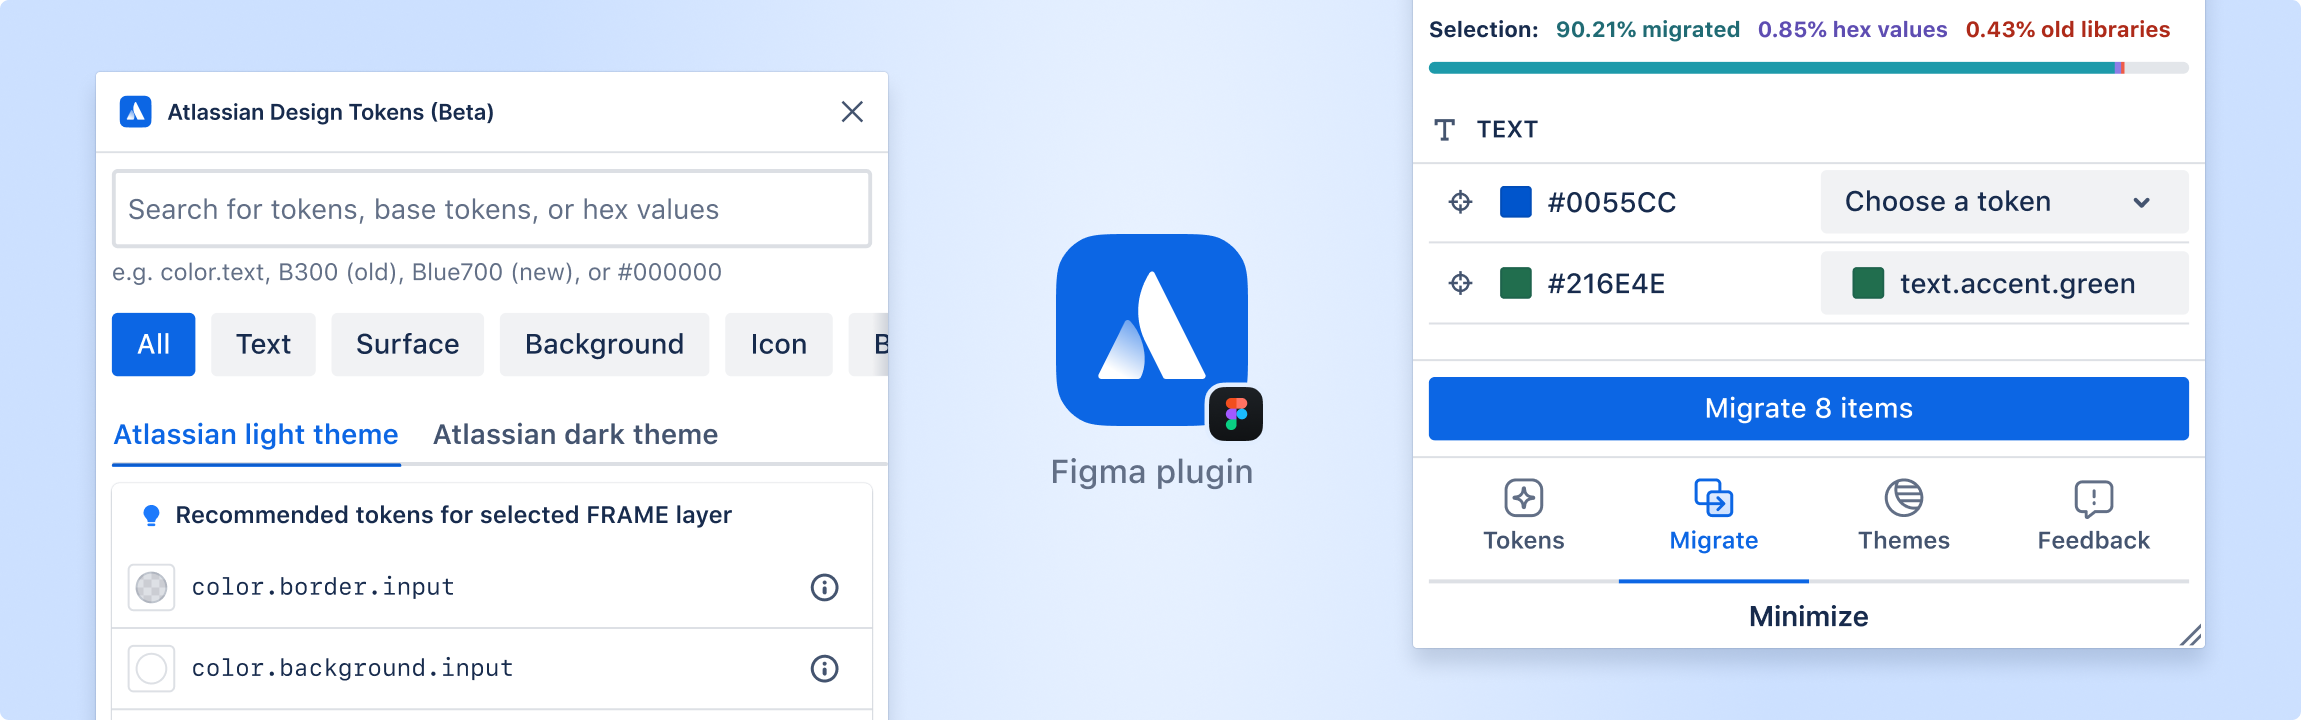 A promotional image showcasing the Atlassian Design Tokens Figma plugin. On the left, a screenshot of the plugin interface shows the tokens view with a search field and filters for finding tokens. On the right, another screenshot of the plugin interface shows the token migration view with pairs of matched tokens. A blue icon with a white Atlassian logo is displayed between the two screenshots, representing the plugin's icon.